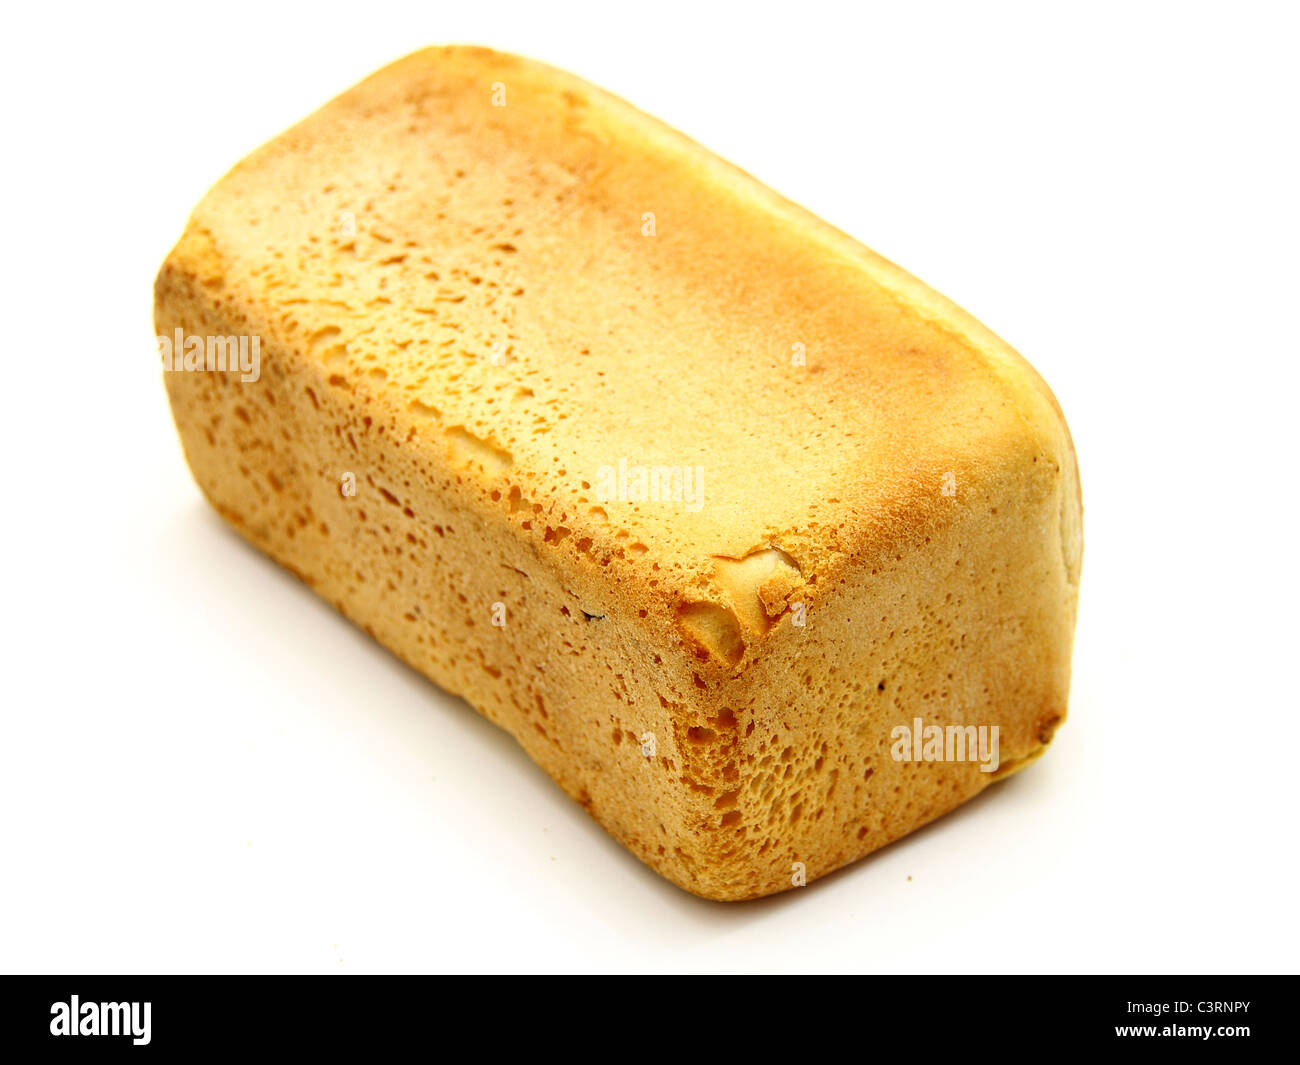 The ruddy long loaf of bread with the fried crust is isolated on a white background Stock Photo